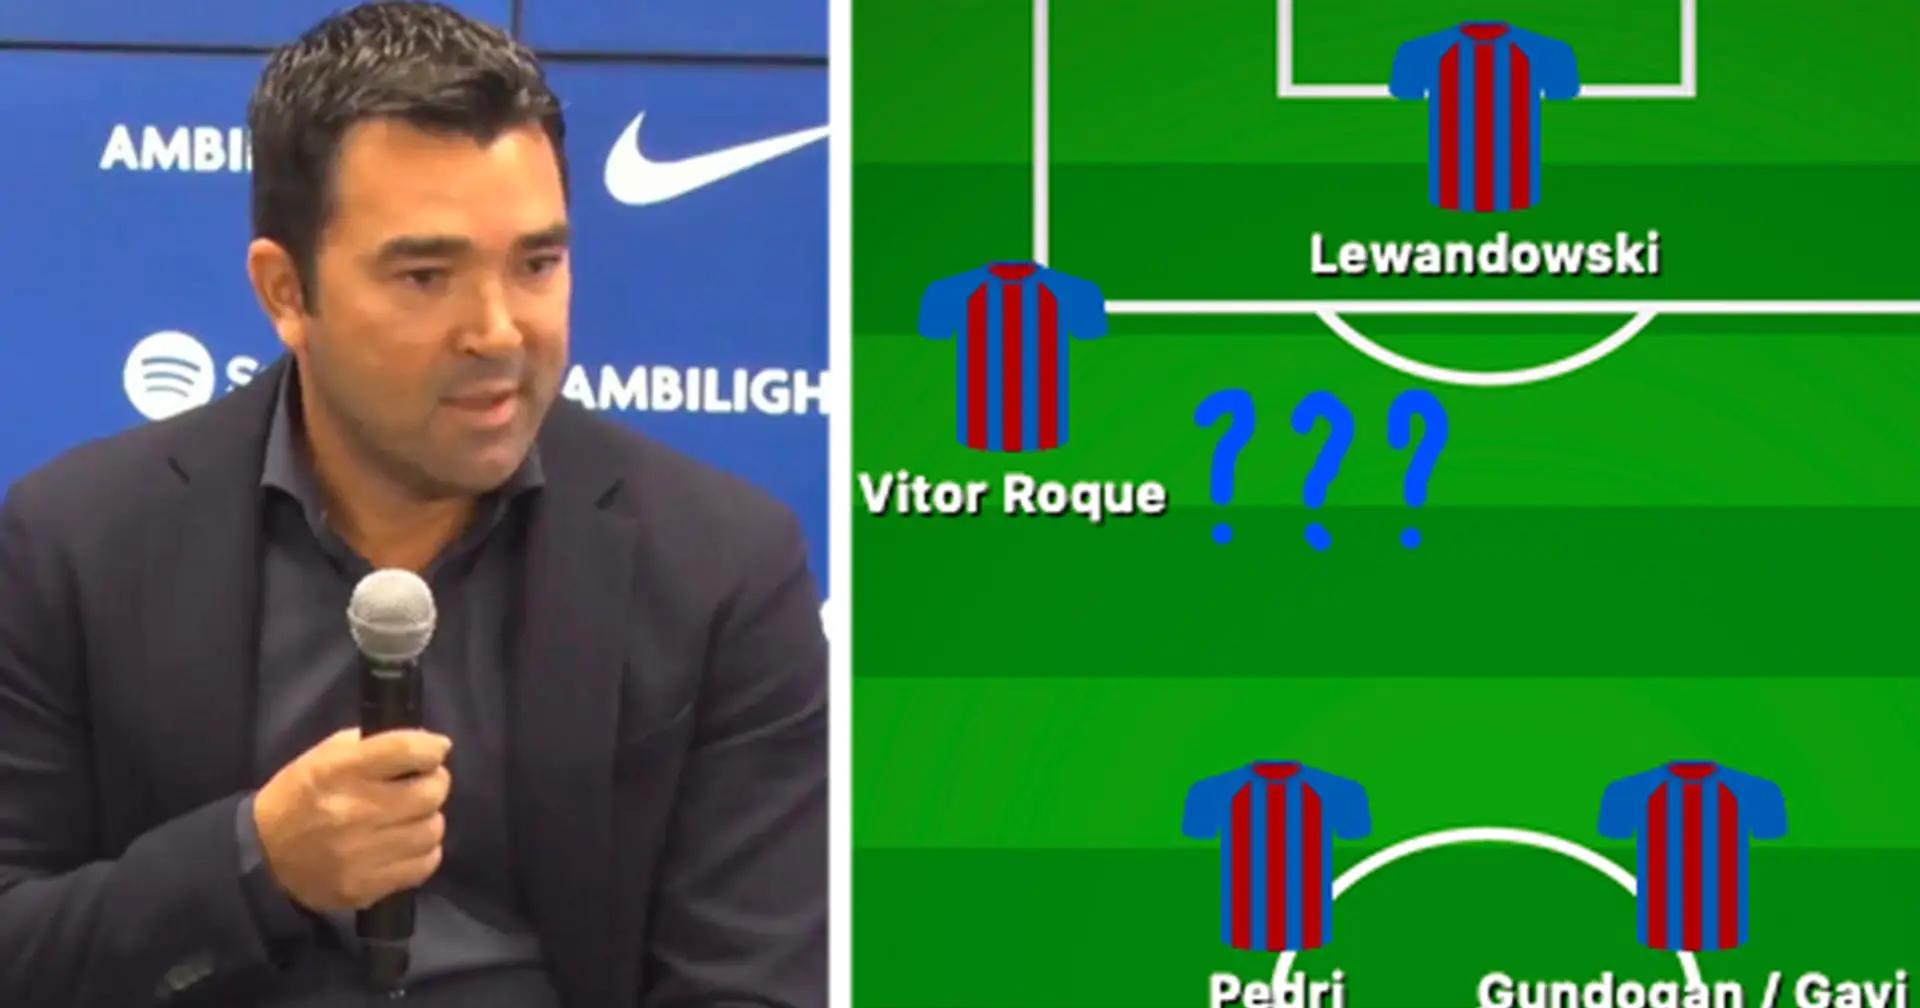 Barca's transfer plan shows exactly what position they will strengthen in summer – not midfield